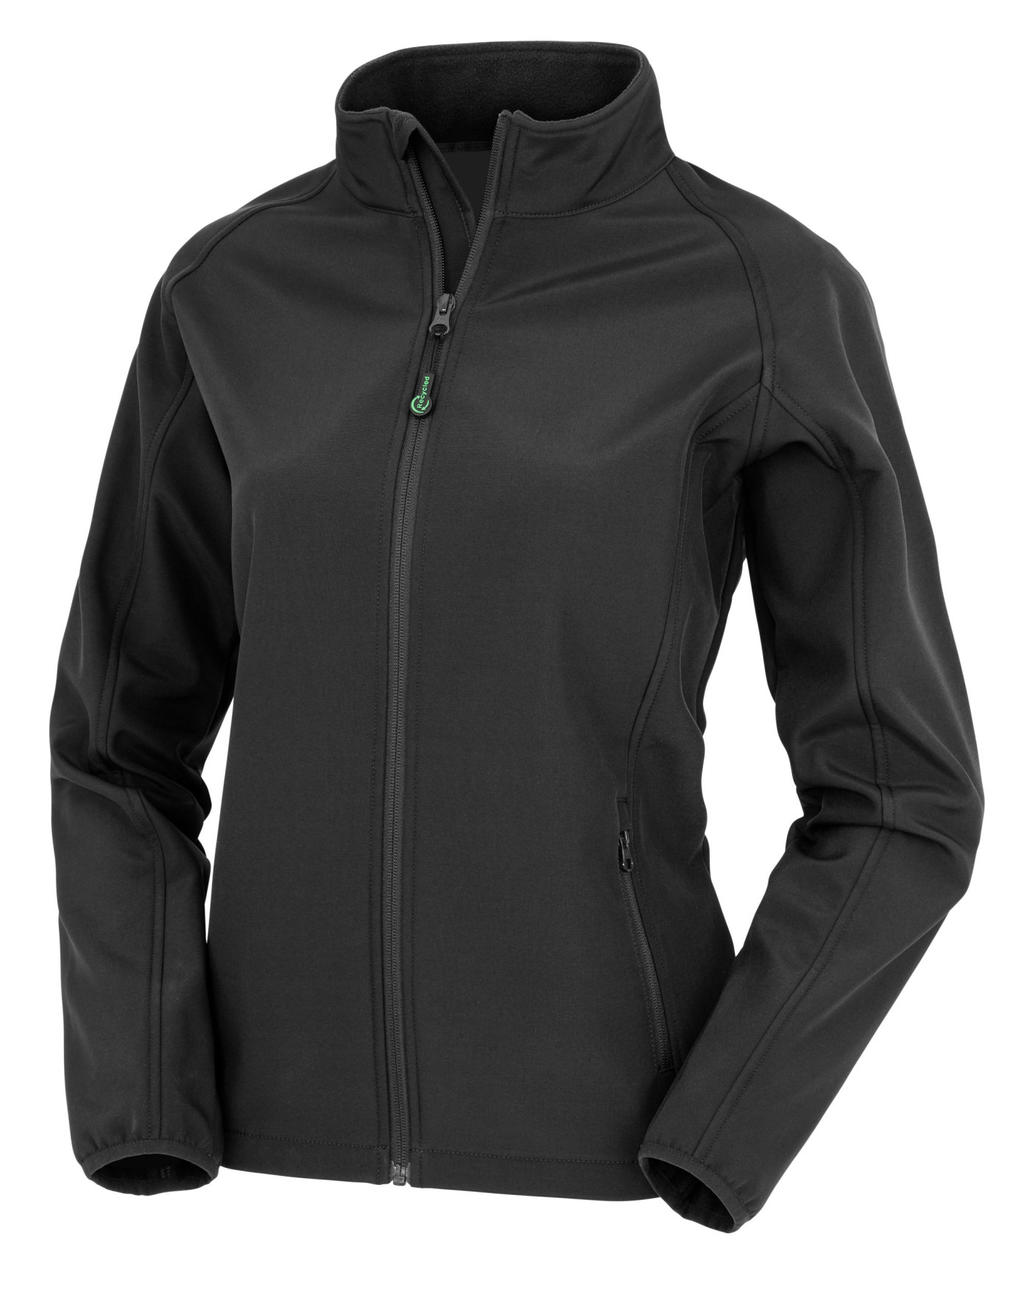 Women's Recycled 2-Layer Printable Softshell Jkt